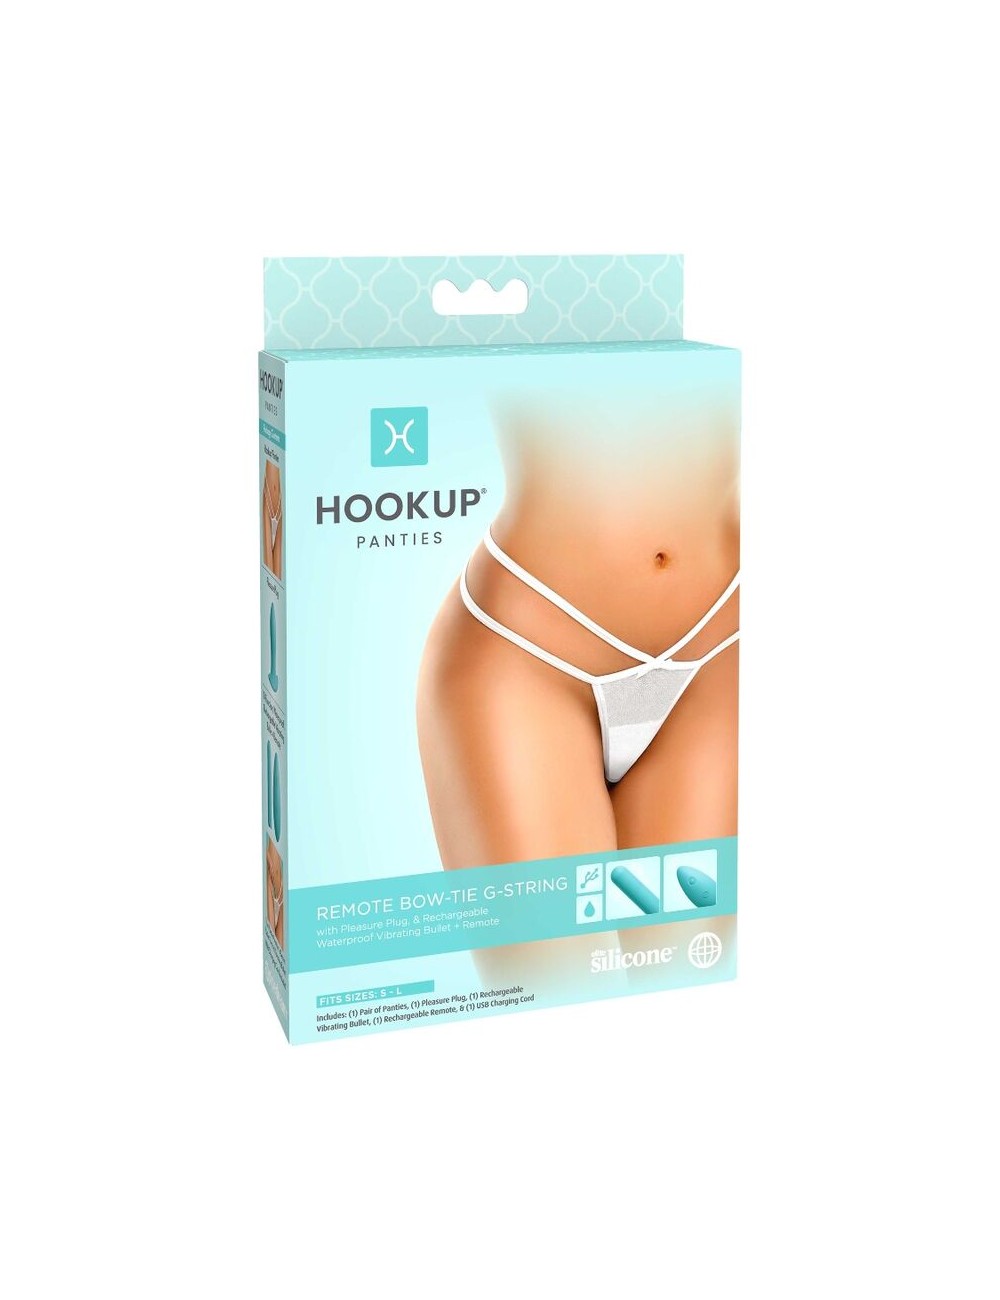 HOOK UP REMOTE BOW-TIE G-STRING TAILLE UNIQUE